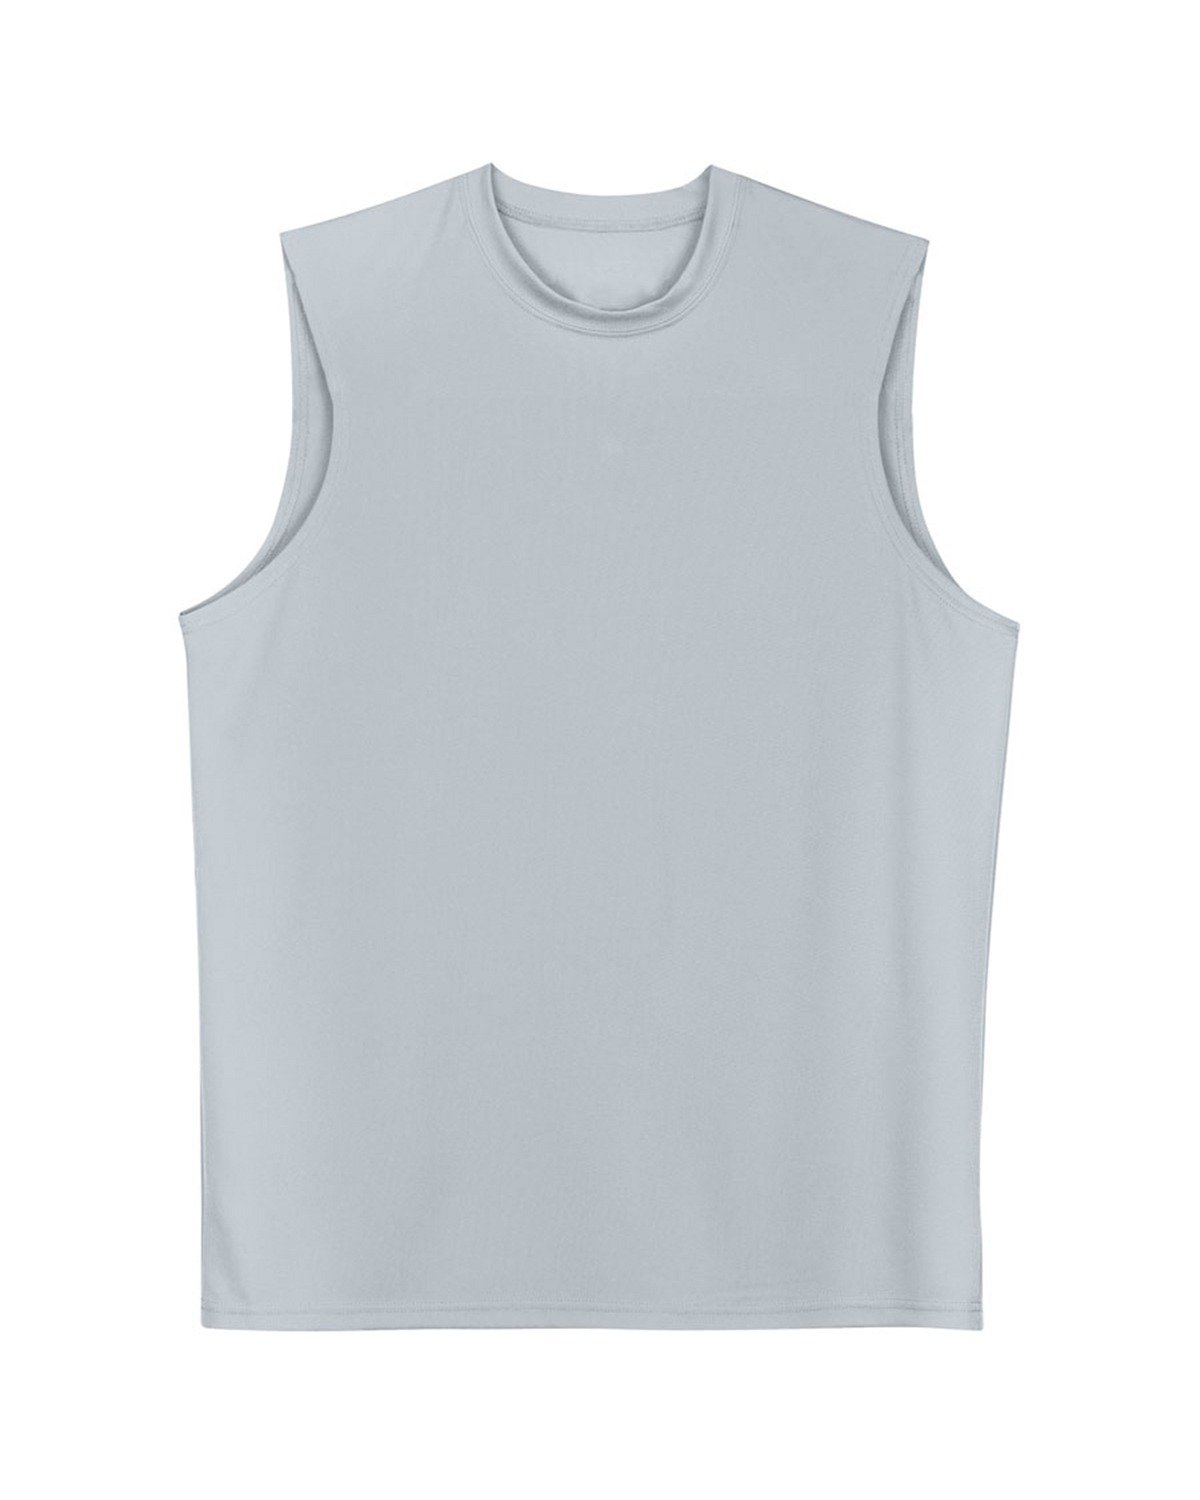 A4 Men's Cooling Performance Muscle T-Shirt SILVER 